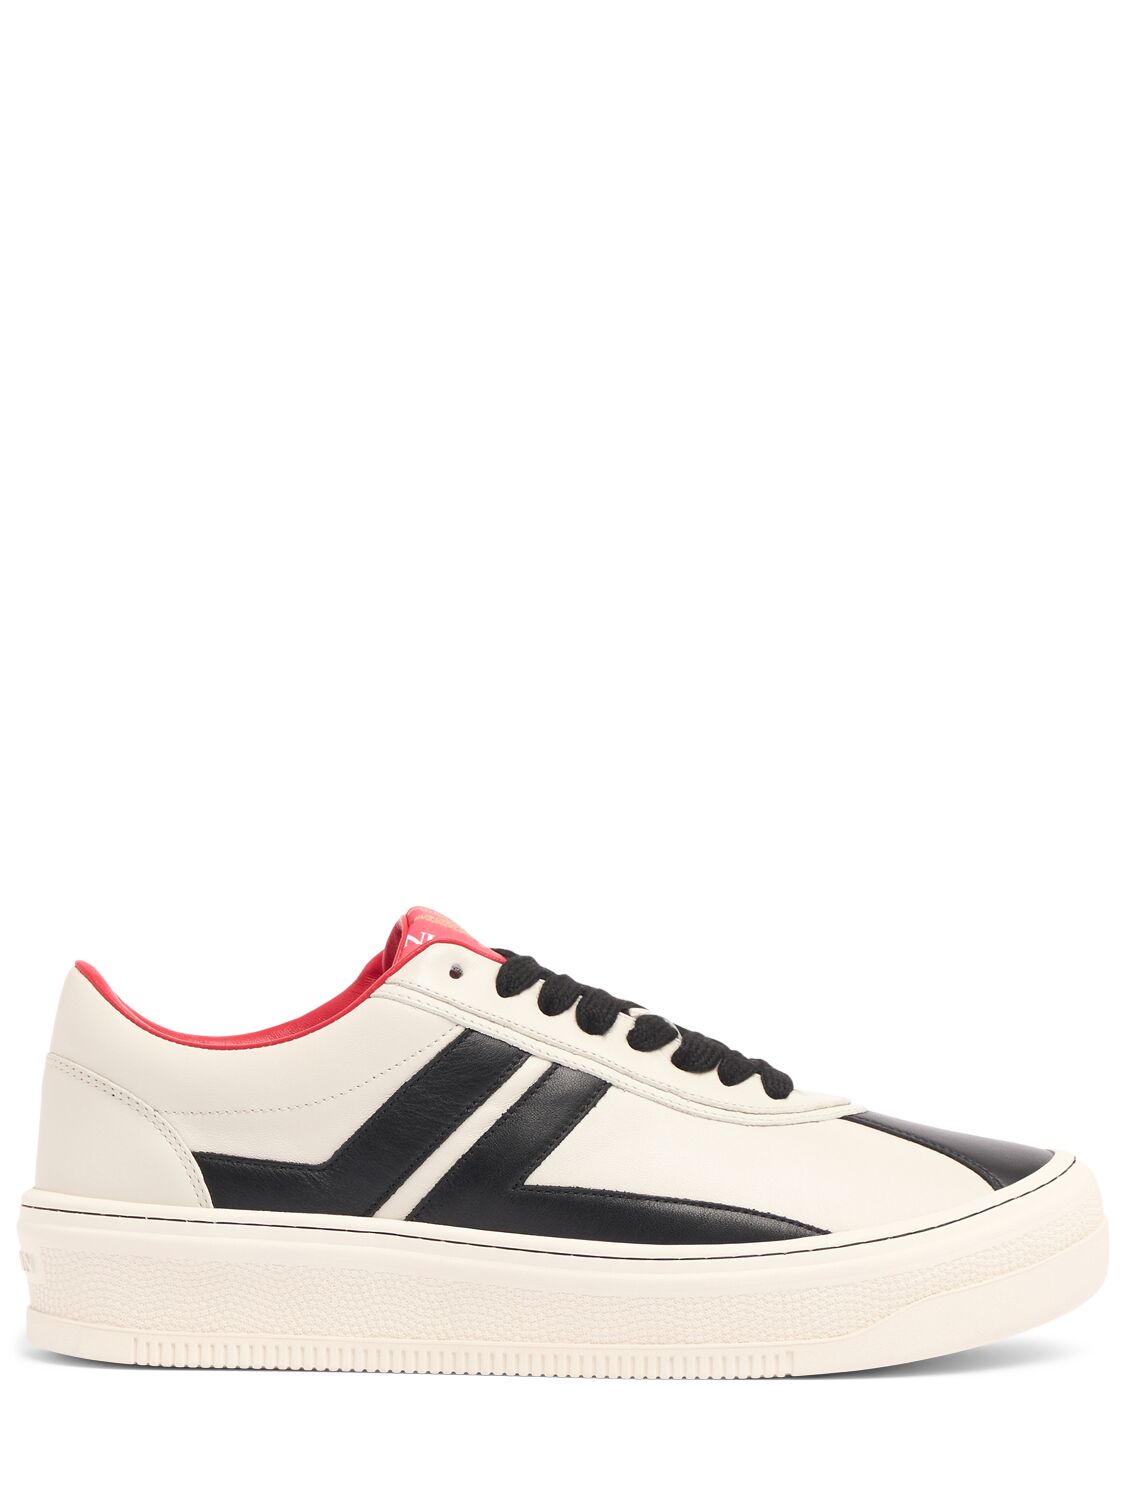 Lanvin Pluto Leather Low Top Sneakers In White